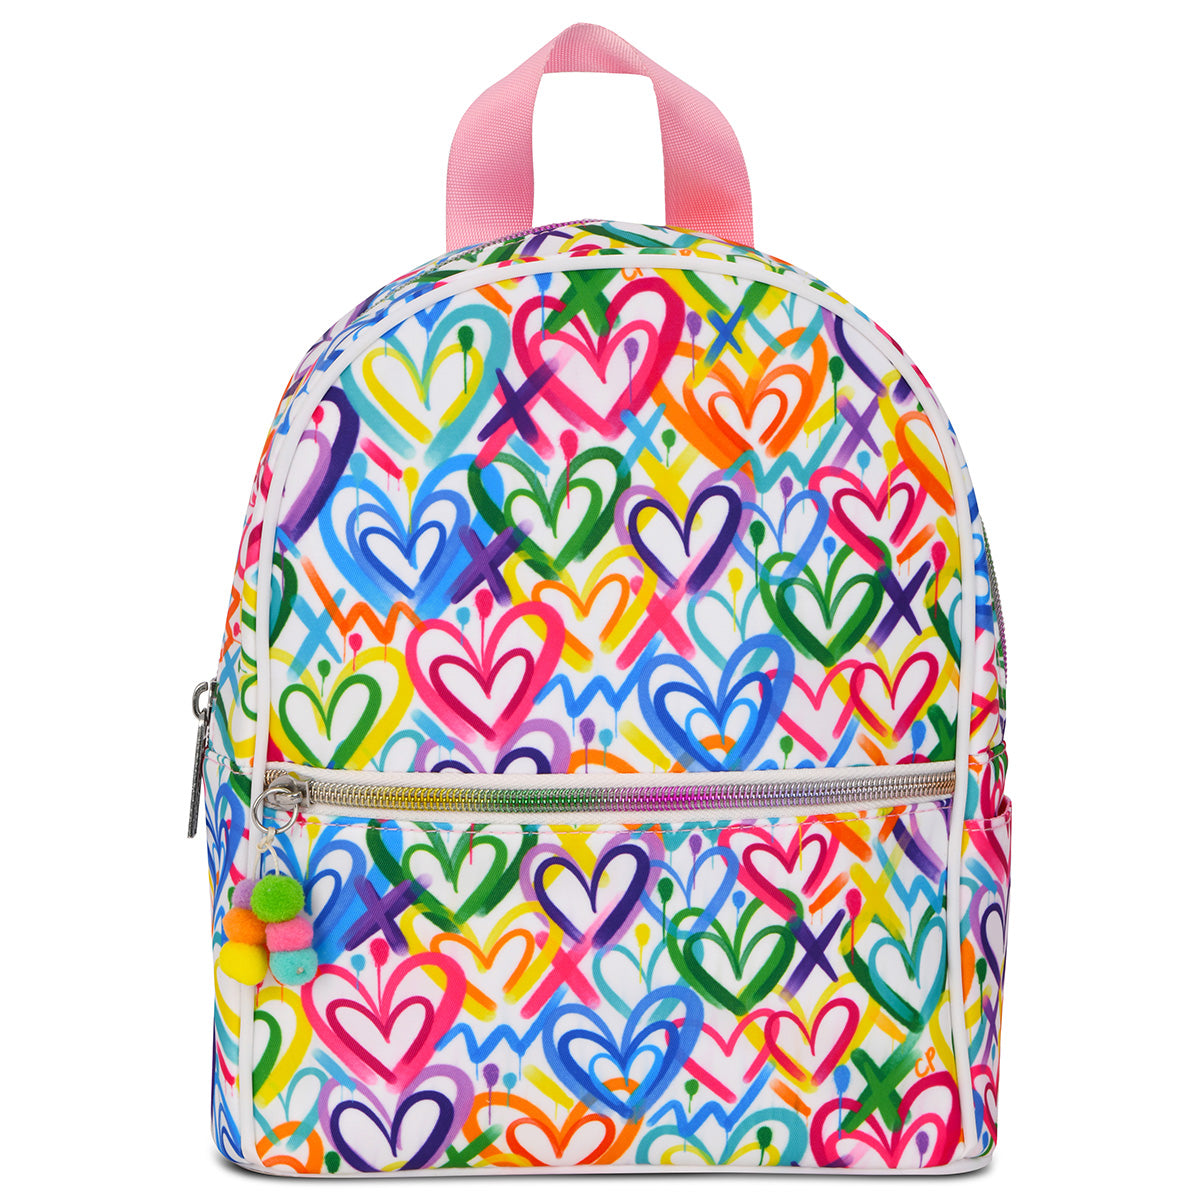 Corey Paige Hearts Mini Backpack Cover